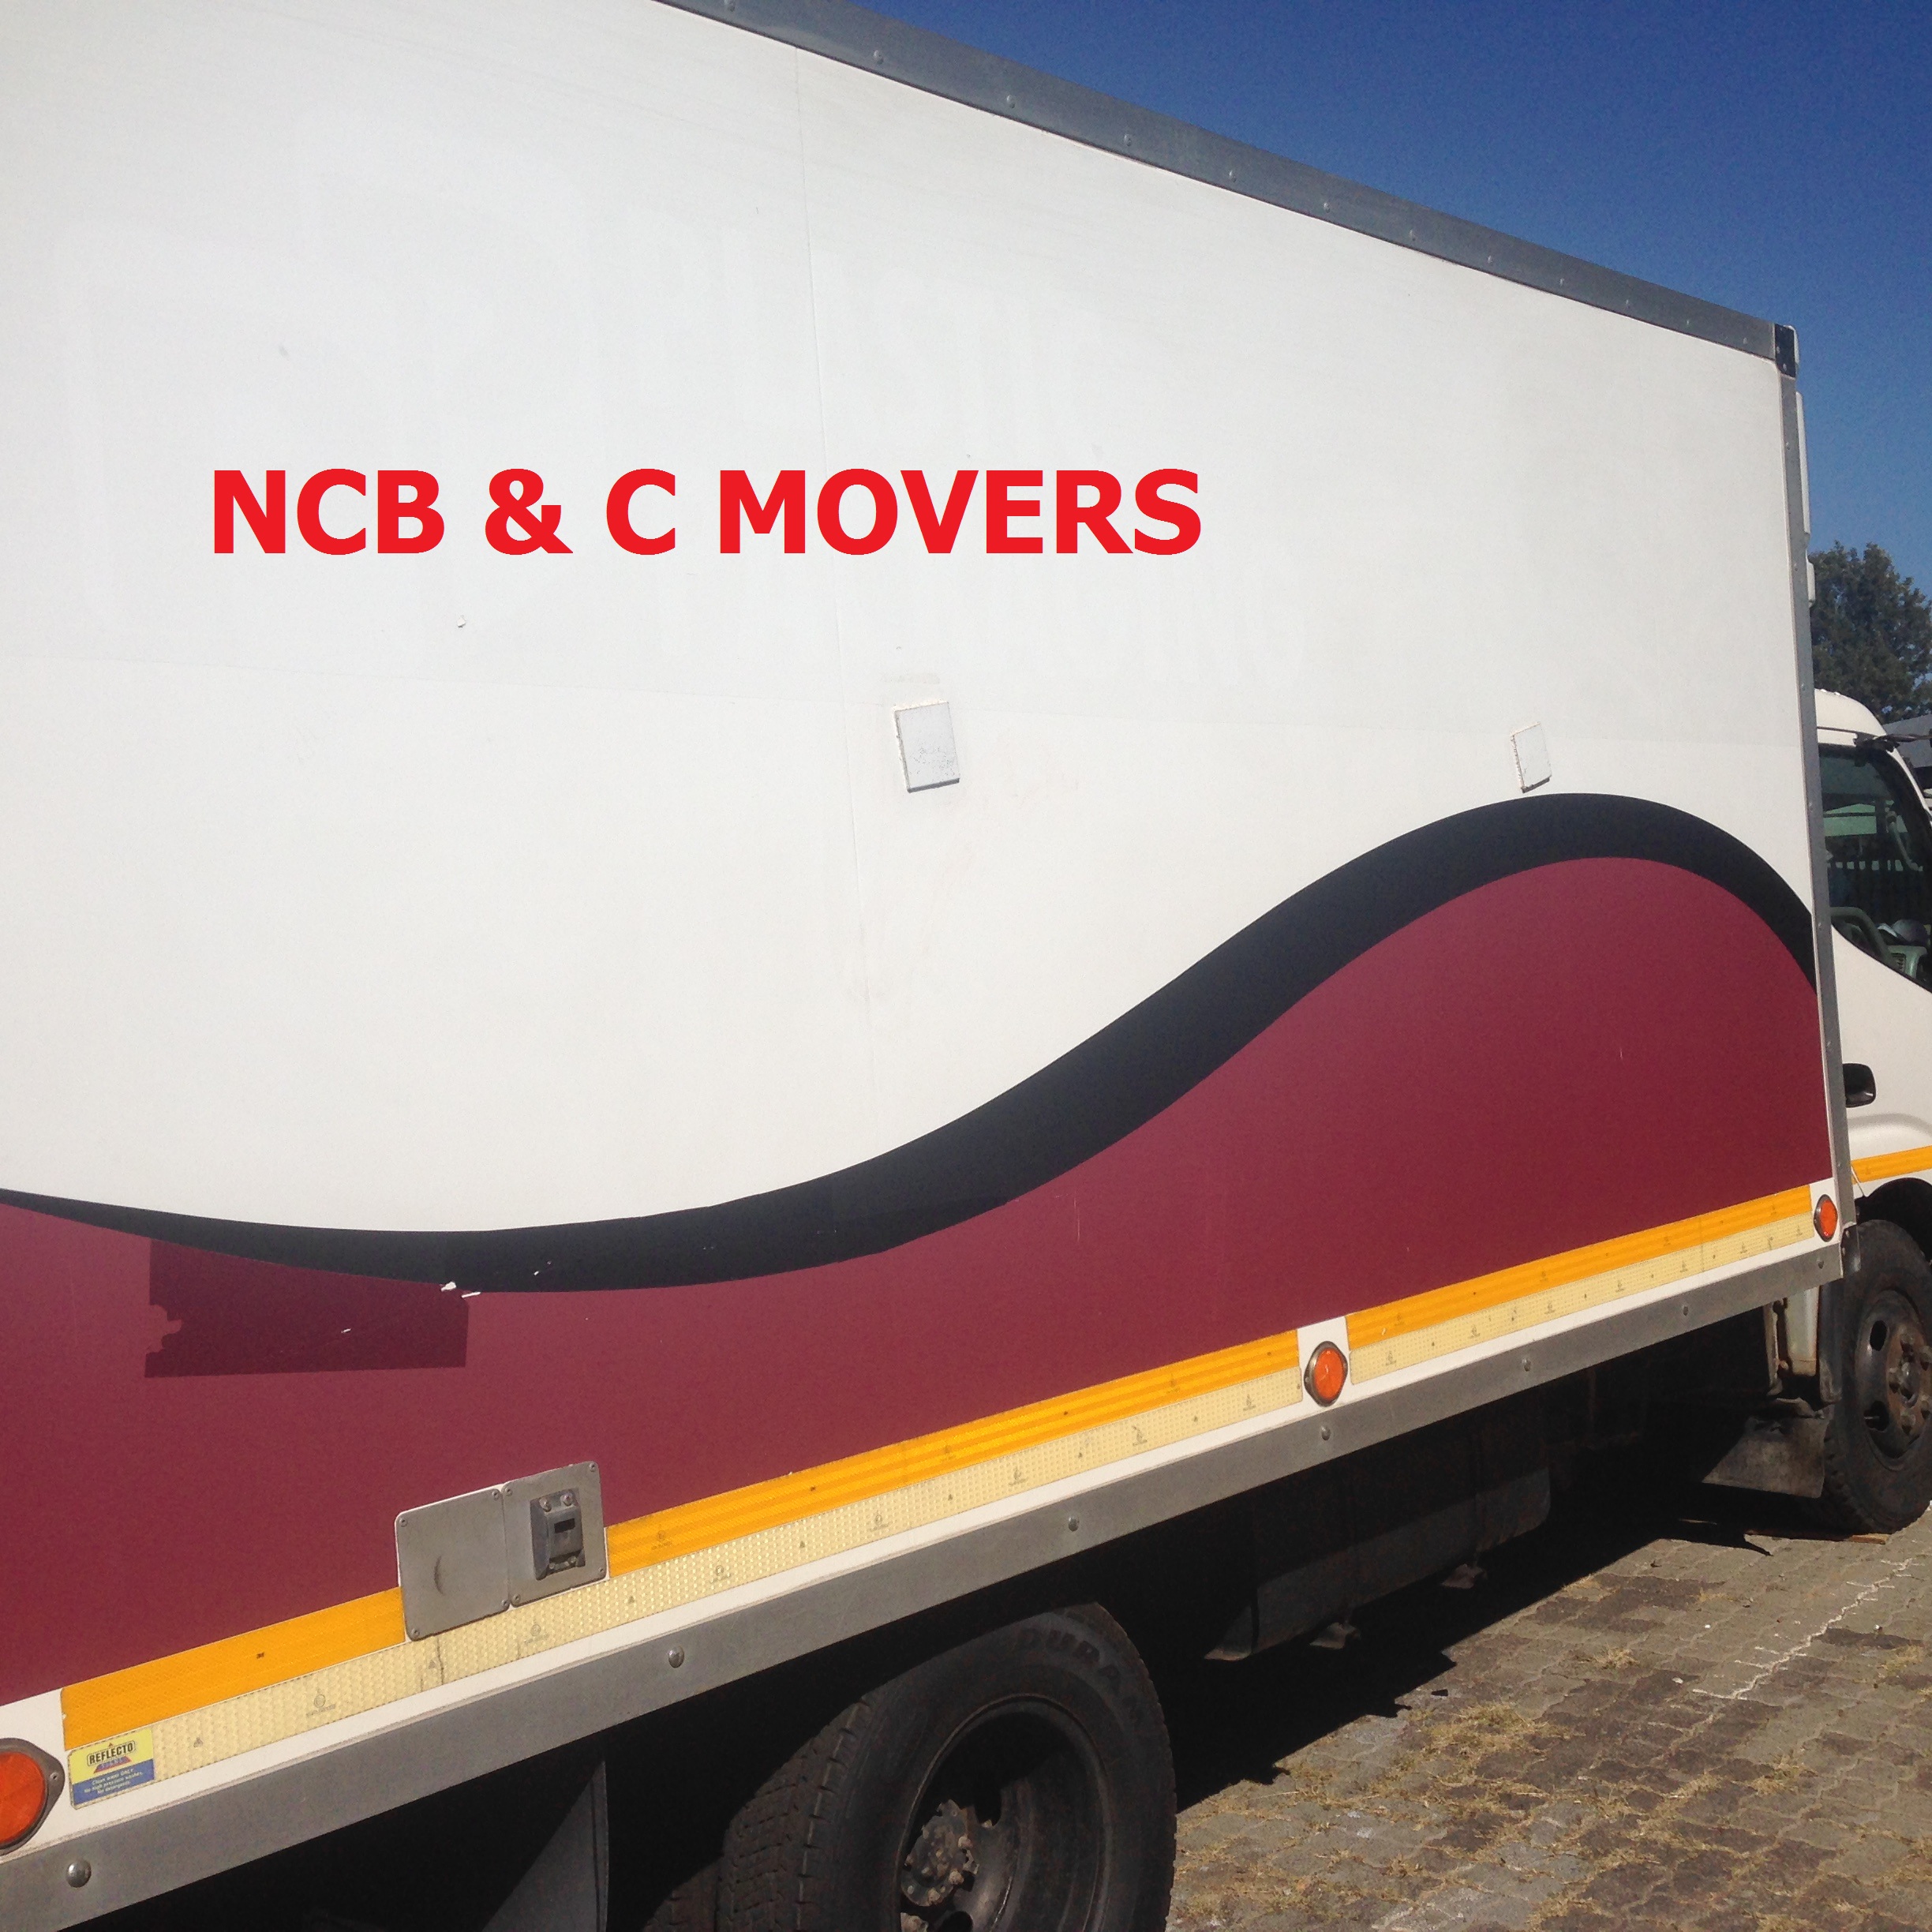 NCB & C MOVERS